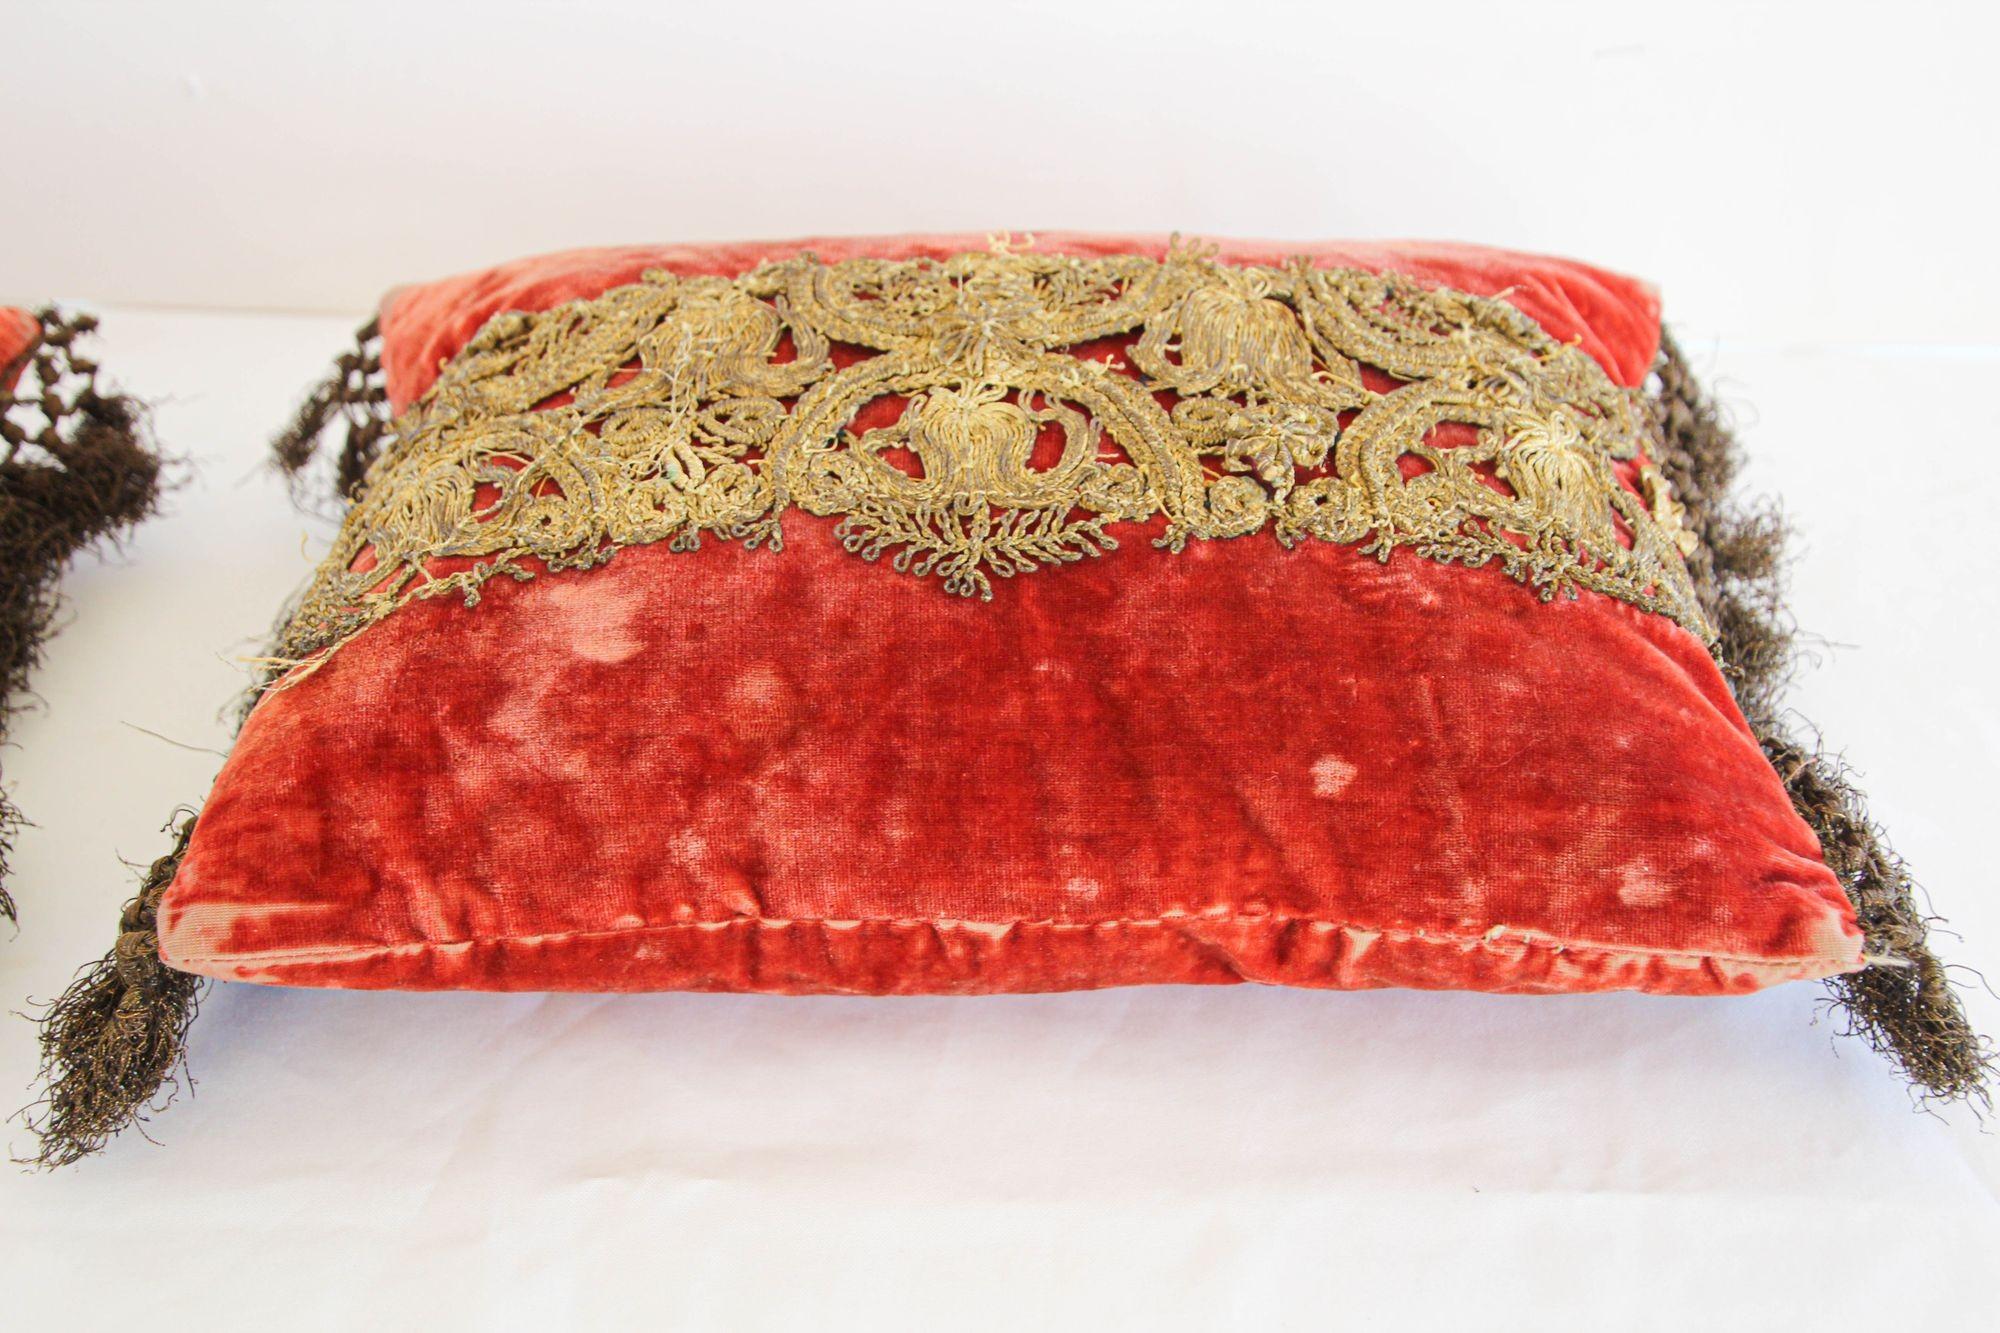 Antique Venetian Moorish Silk Velvet Throw Pillows Embellished Metallic Treads In Fair Condition For Sale In North Hollywood, CA